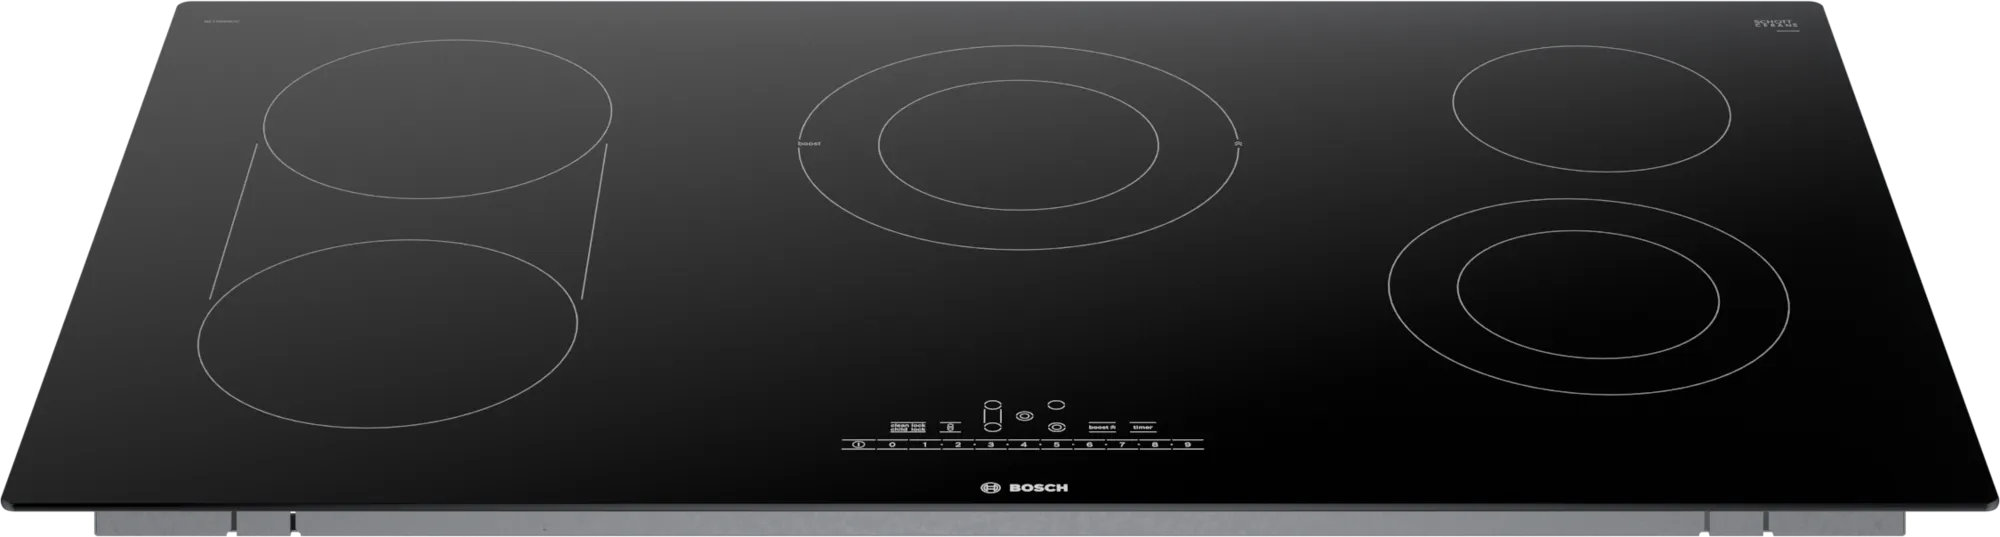 NET8669UC by Bosch - 800 Series Electric Cooktop Black, Without Frame  NET8669UC